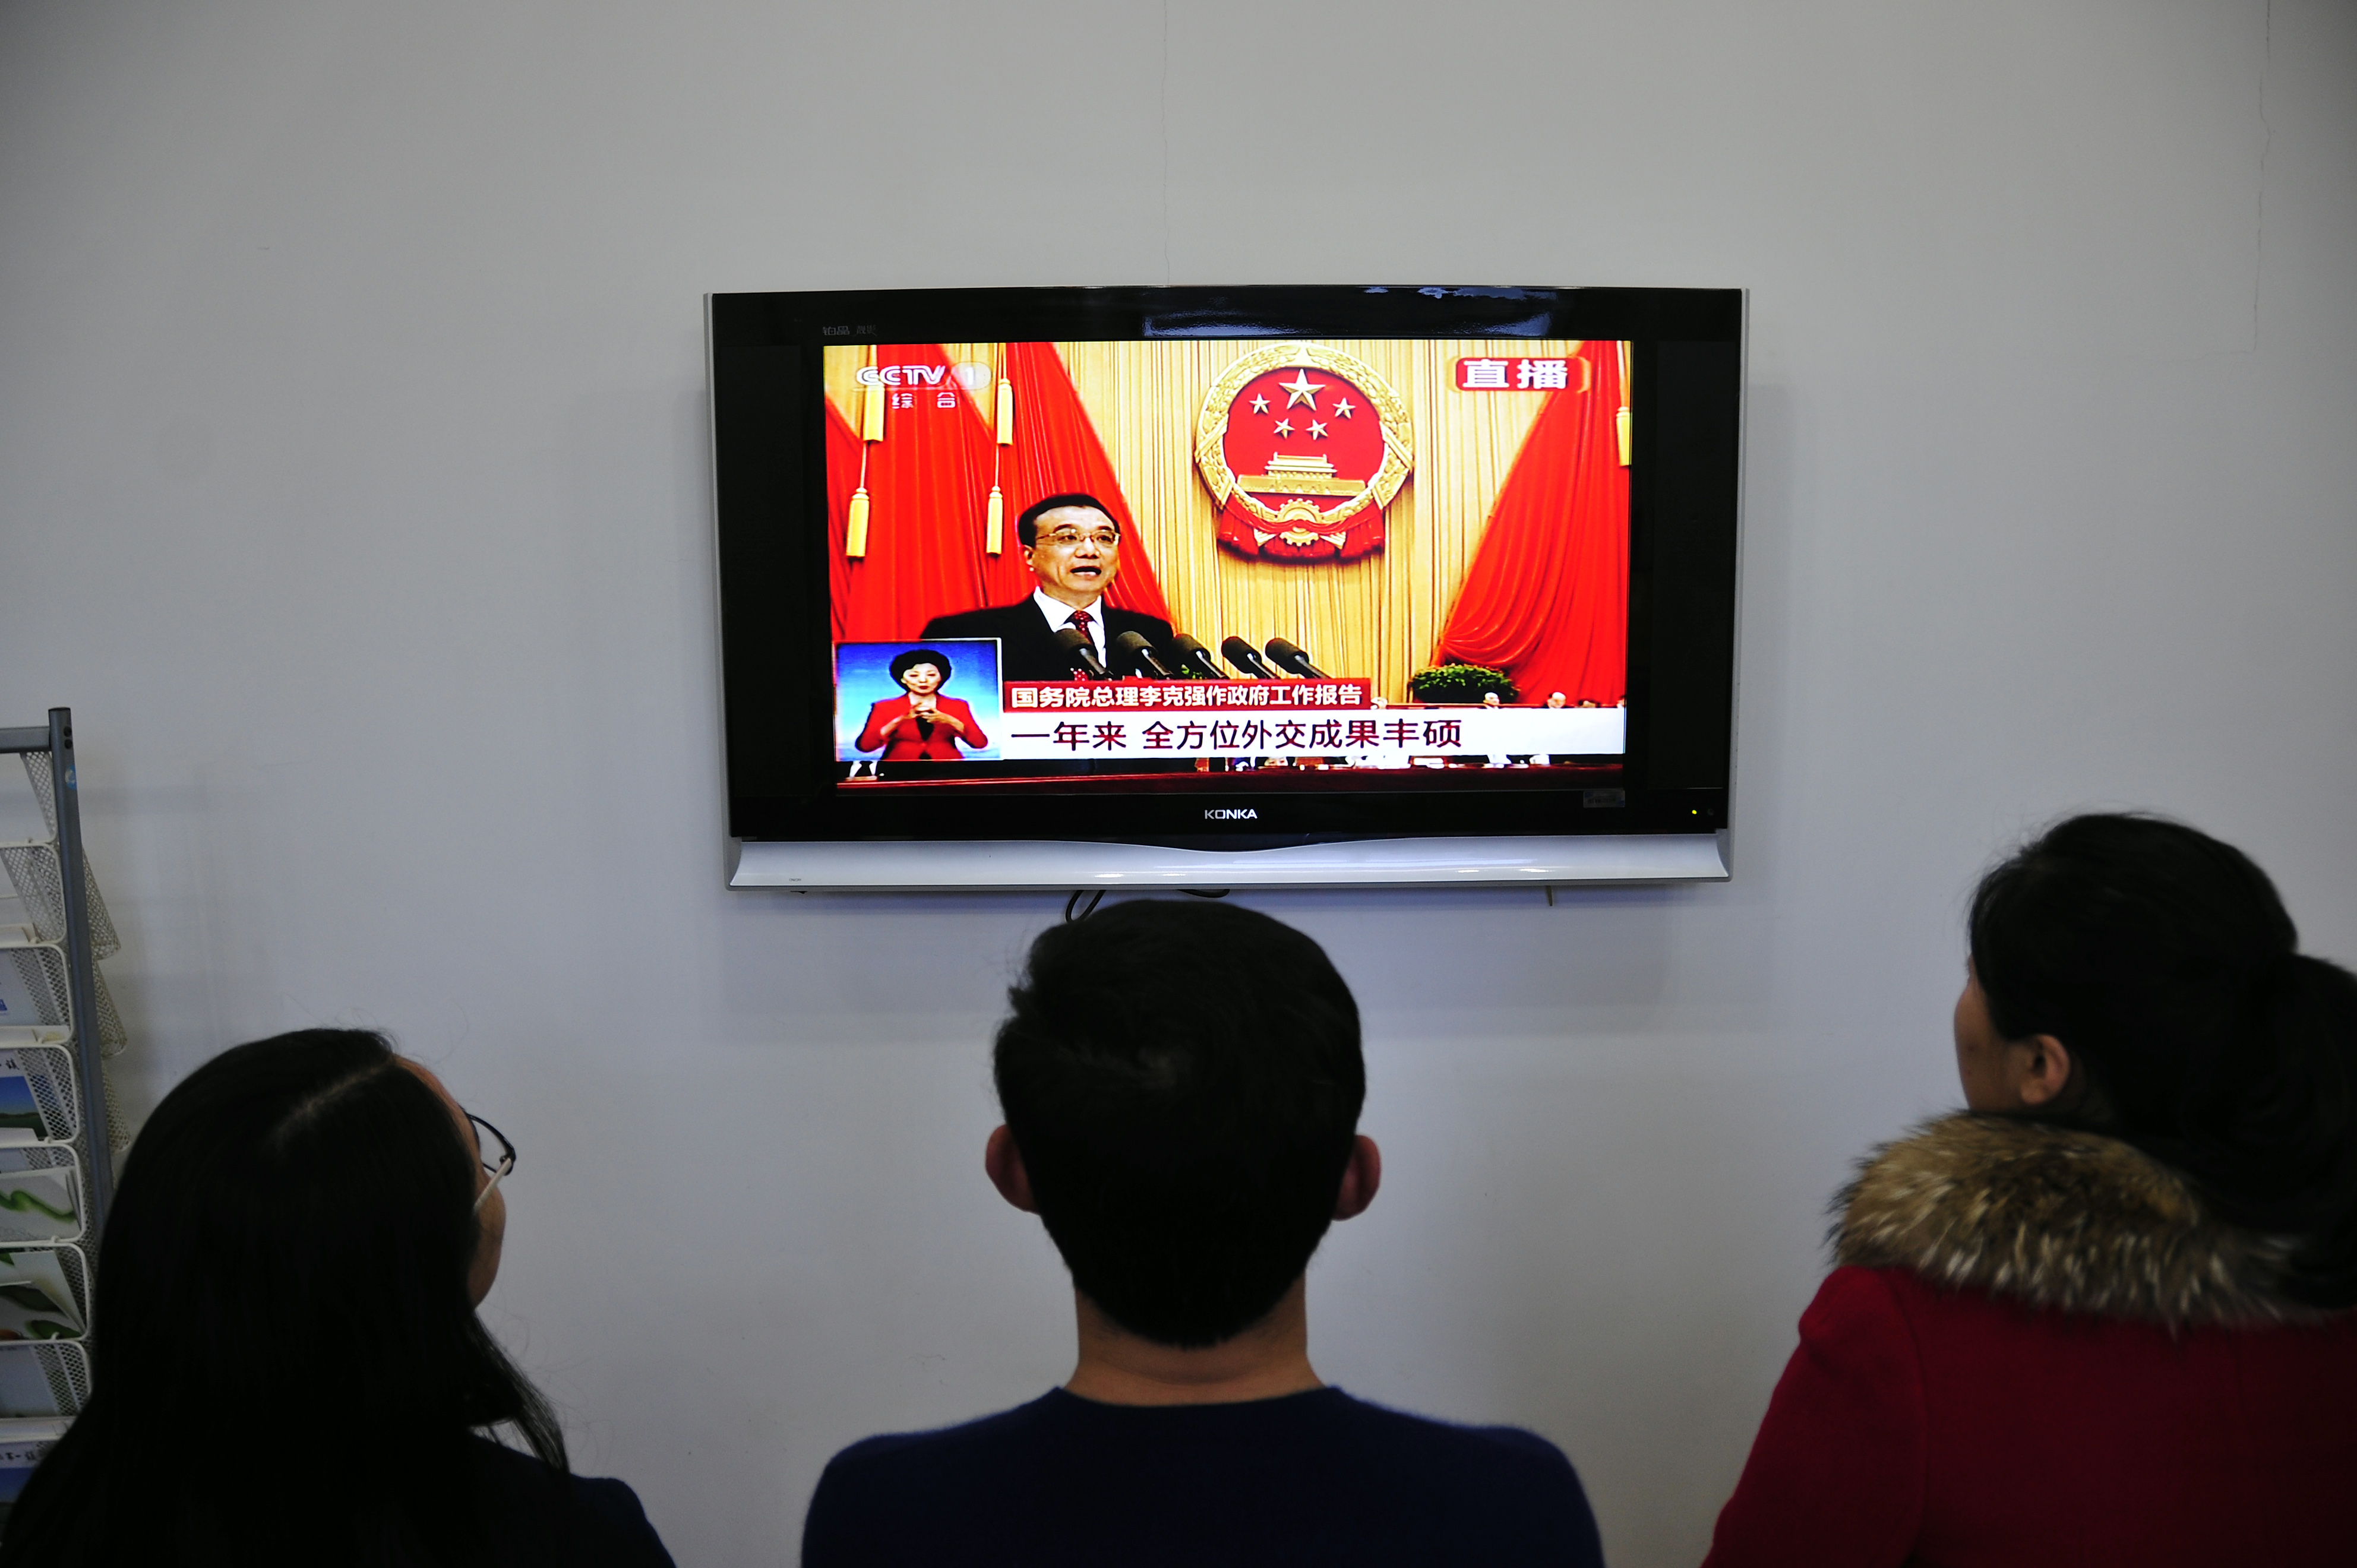 Chinese people watch live television coverage at a conference room in Yantai, east China's Shandong province as Chinese Premier Li Keqiang delivers his report during the opening ceremony of the National People's Congress in the Great Hall of the People in Beijing on March 5, 2016. (AFP/Getty Images)